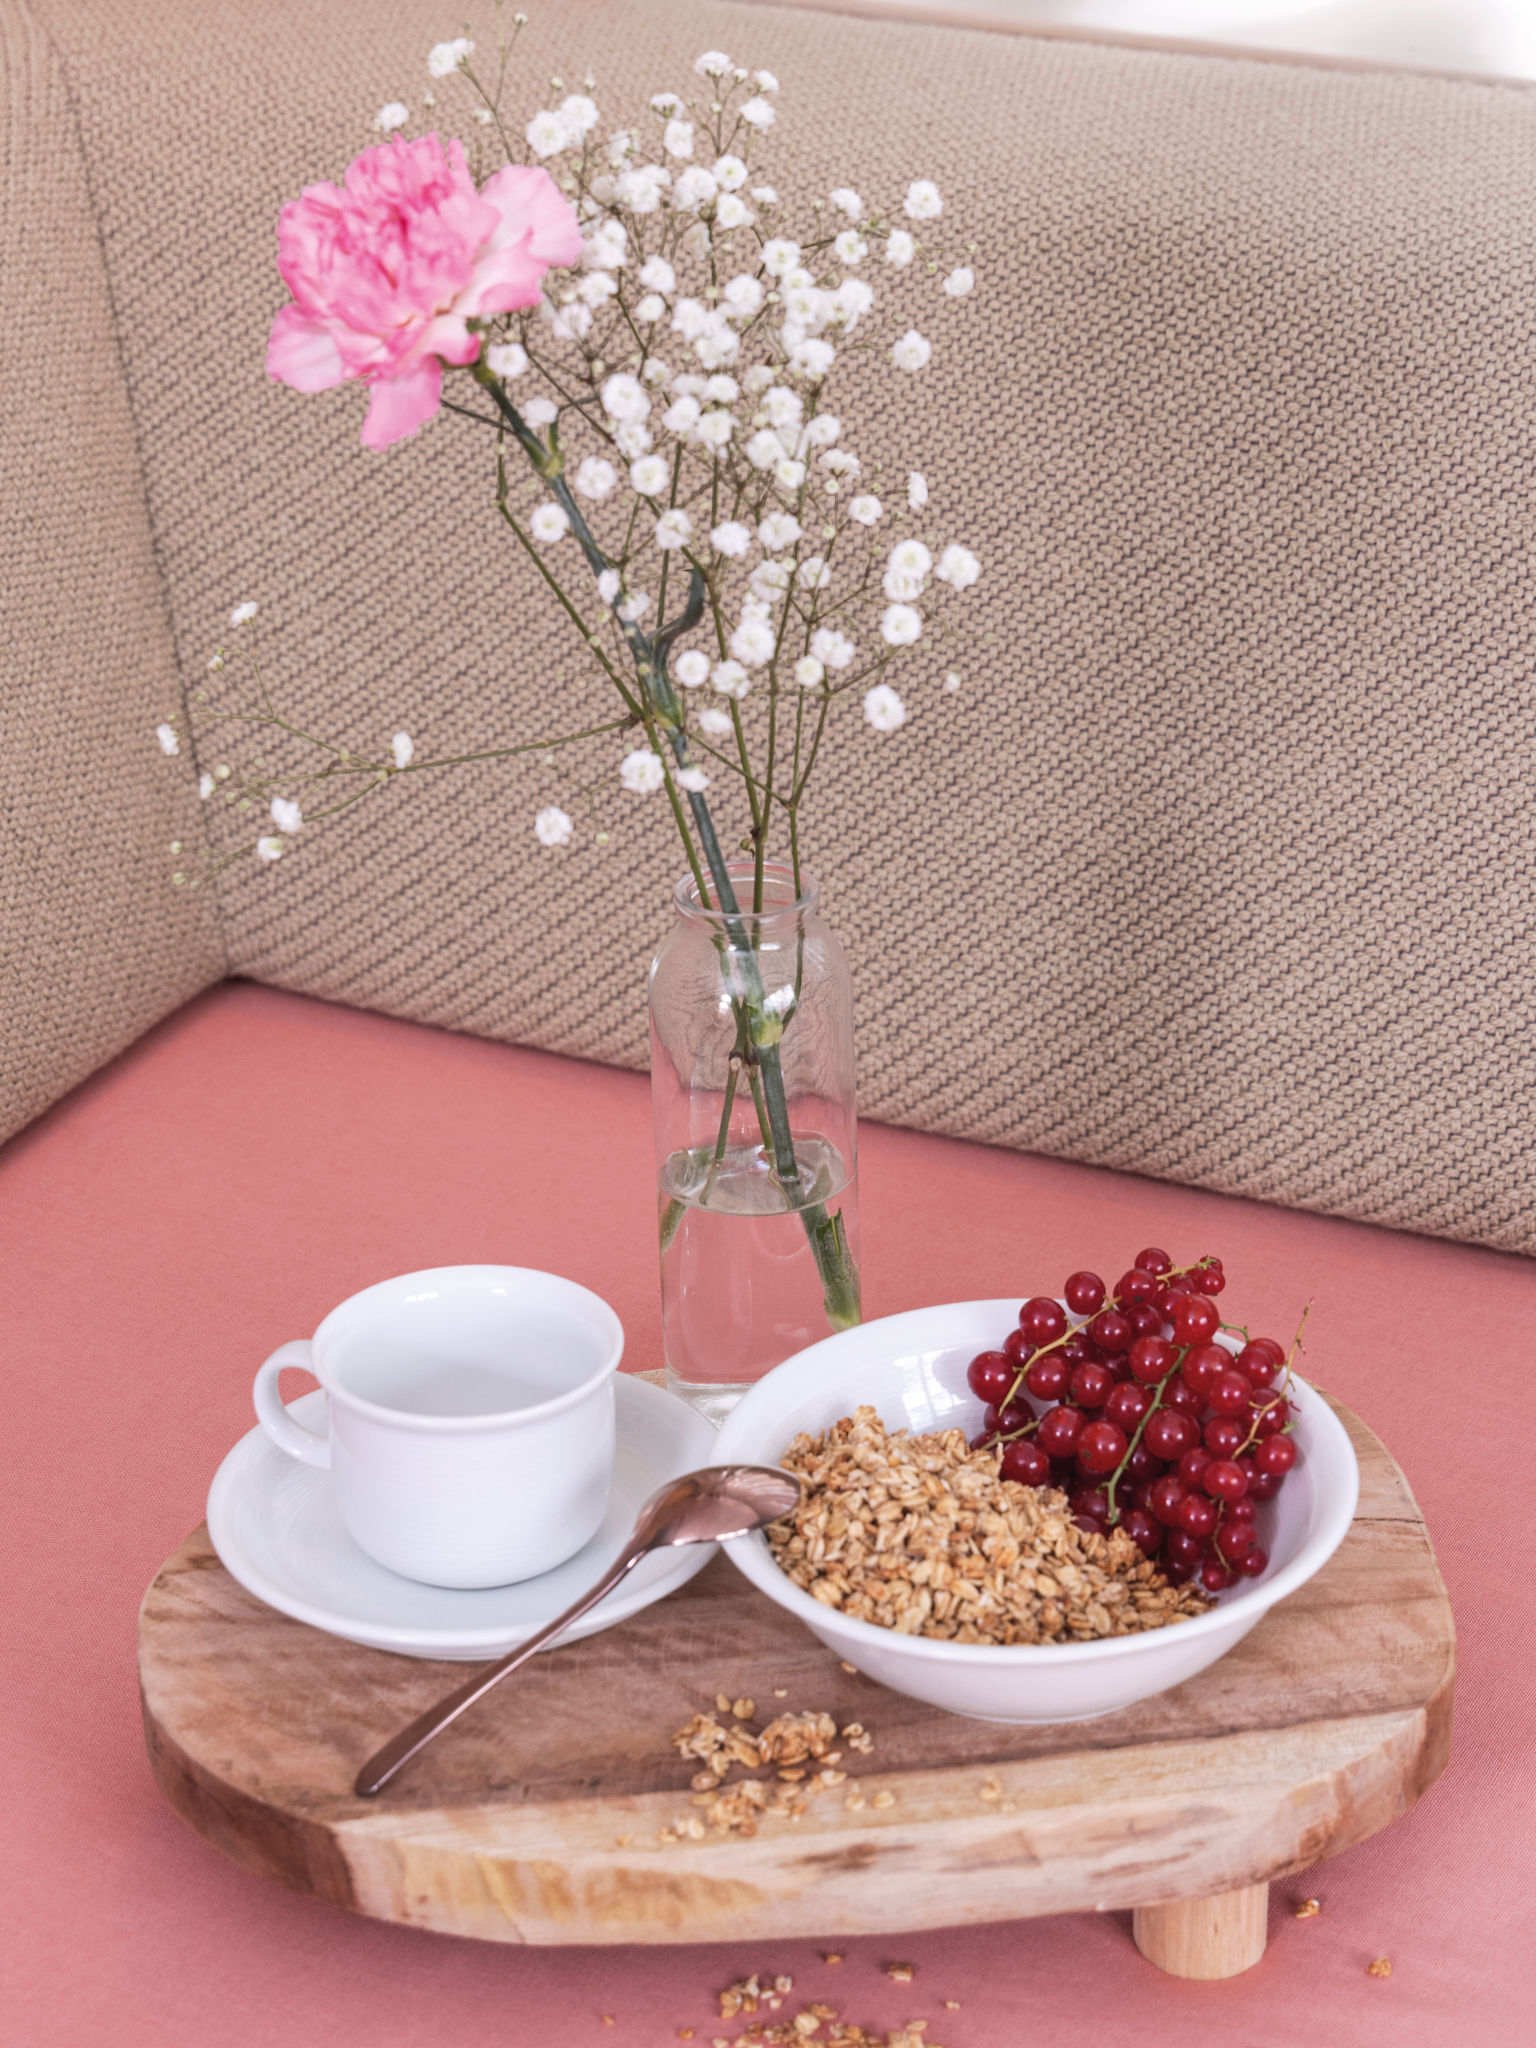 Thomas Trend White bowl with cereals, cup with saucer and small vase with flowers on wooden tray